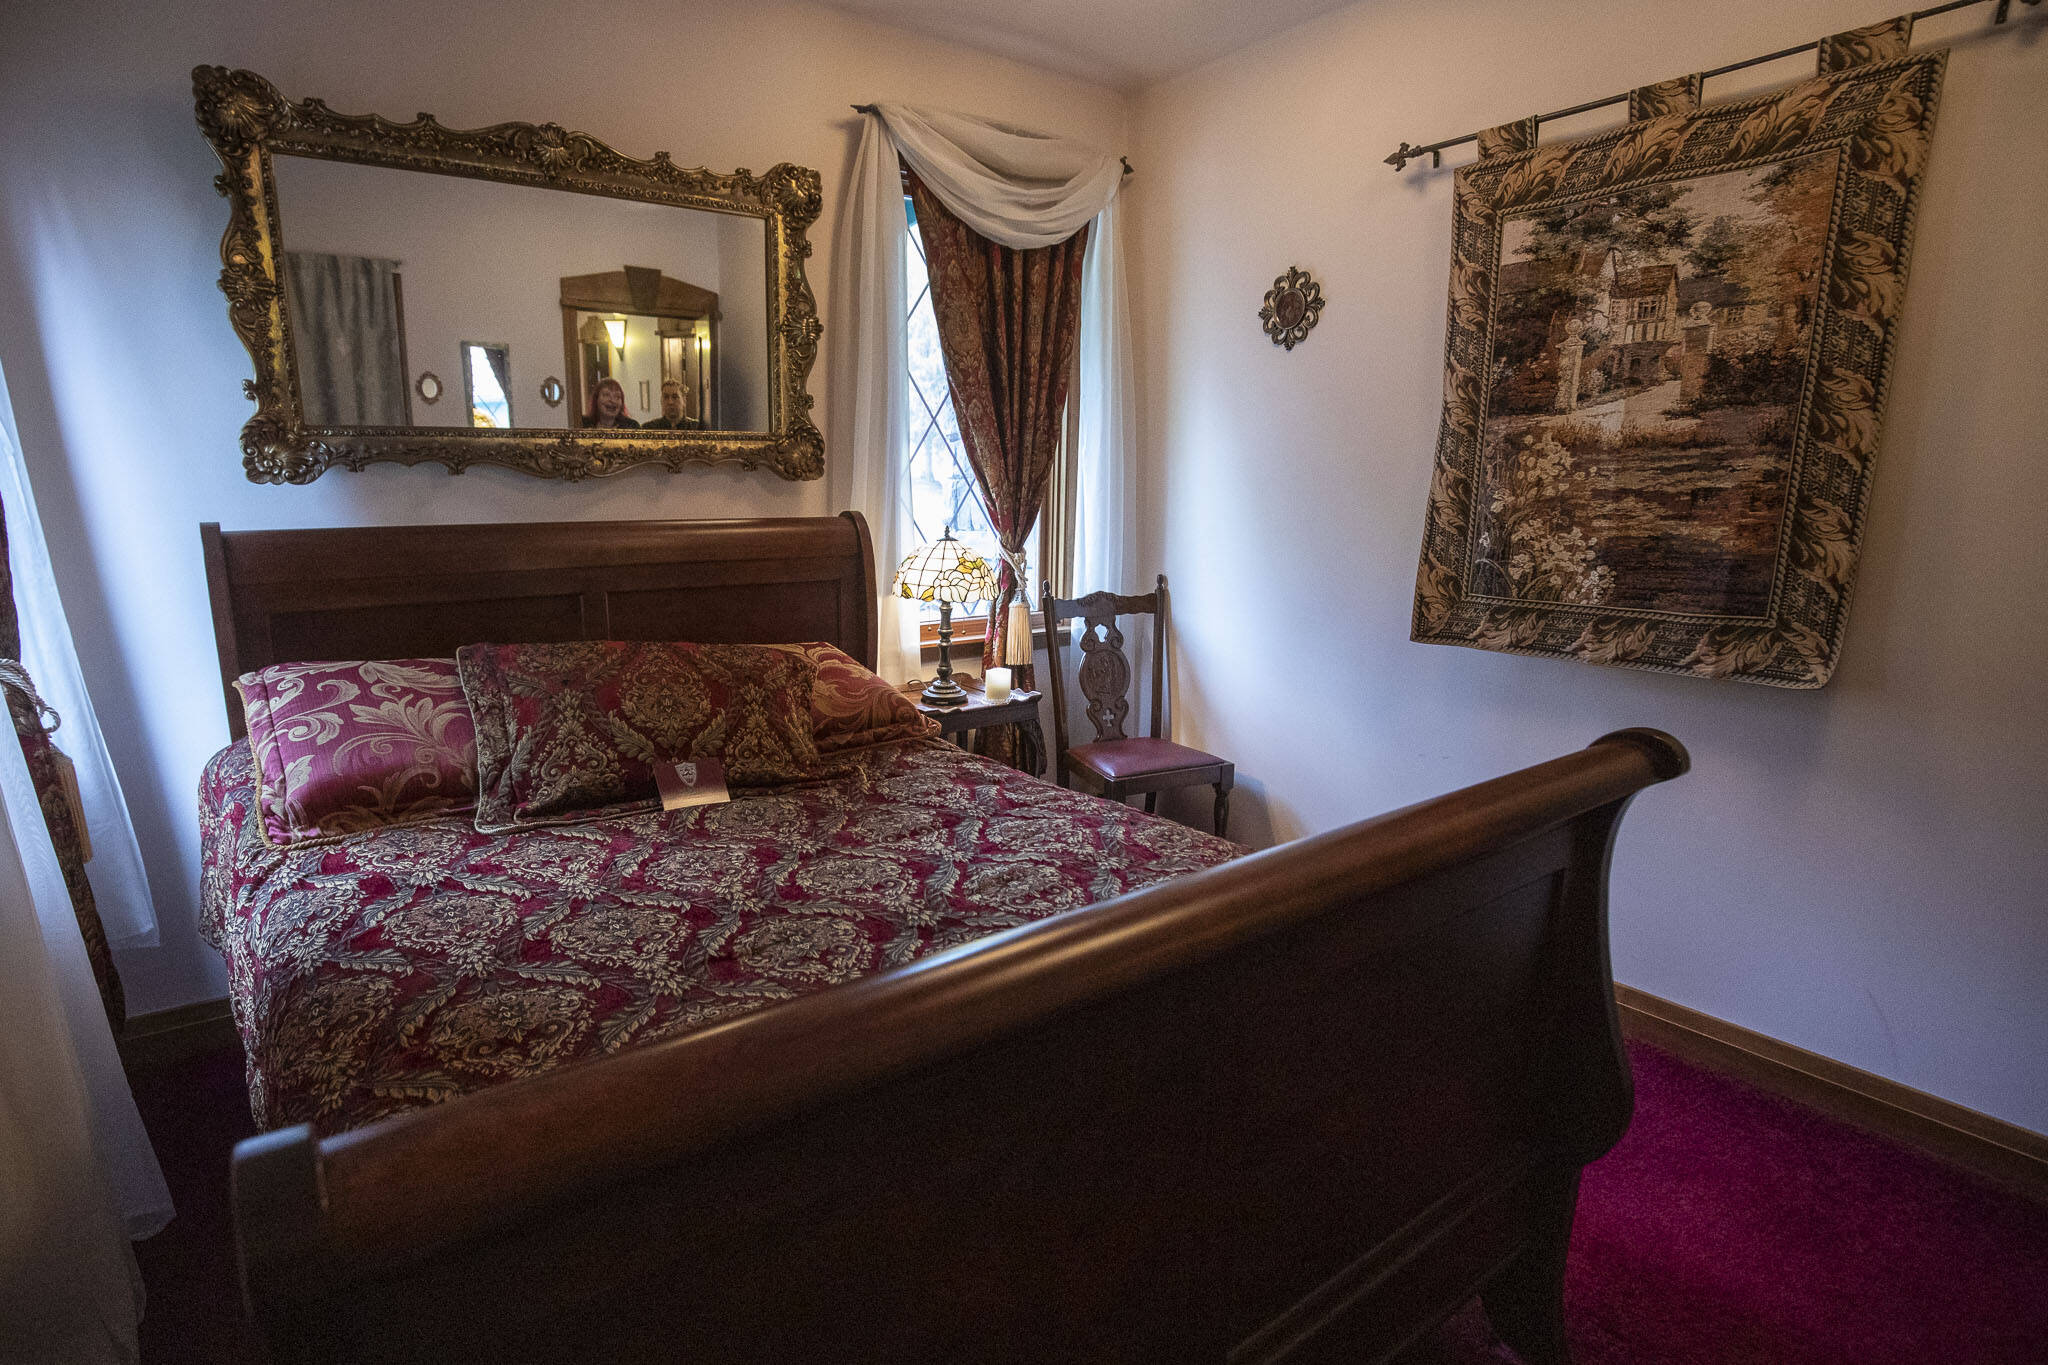 The Queen Suite, one of four bedrooms at High Rock Castle. Annie Barker / The Everett Herald photo